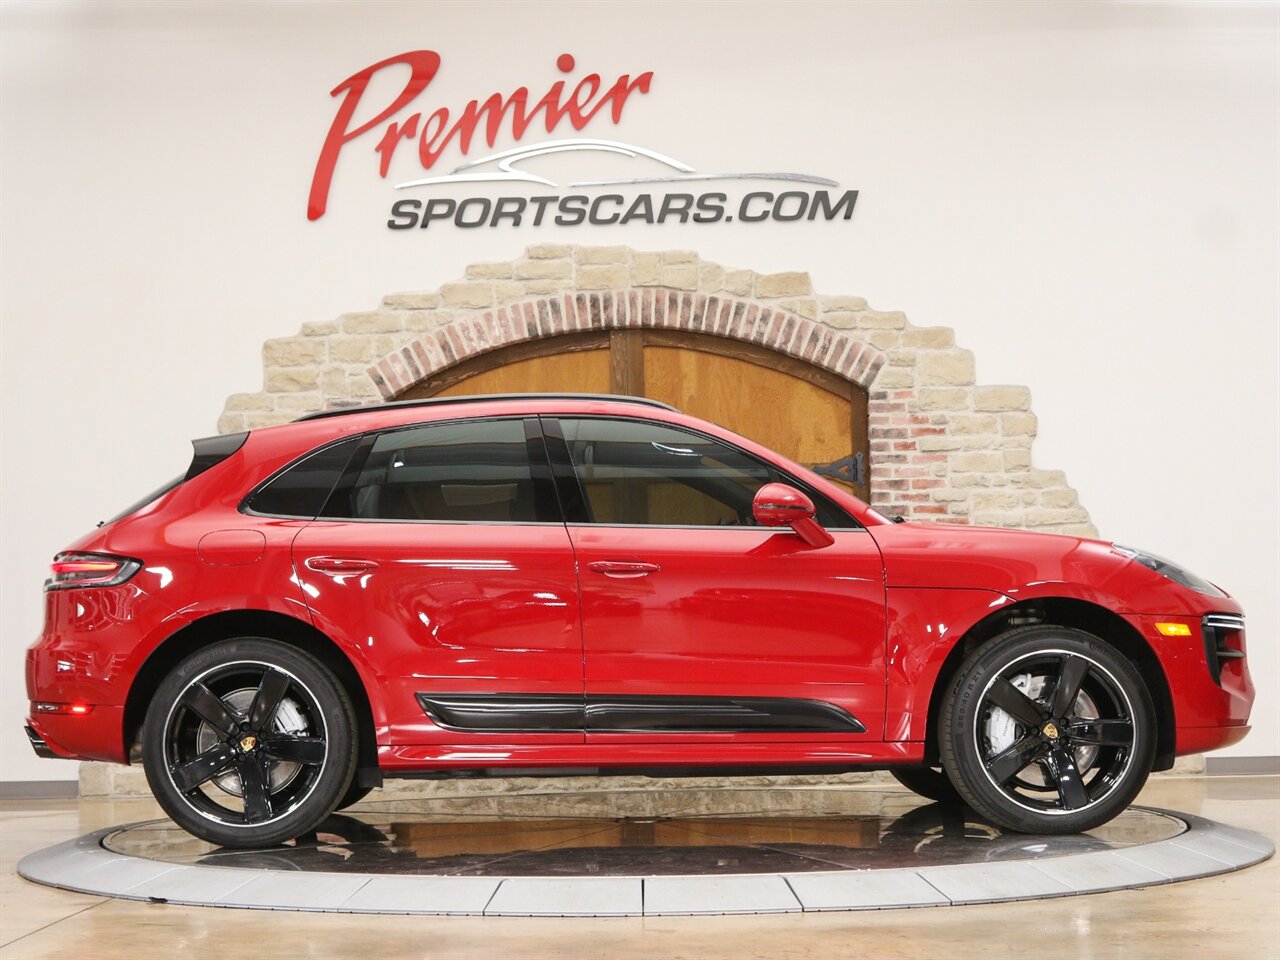 2020 Porsche Macan Turbo  (Lots of options MSRP $124,740) - Photo 3 - Springfield, MO 65802